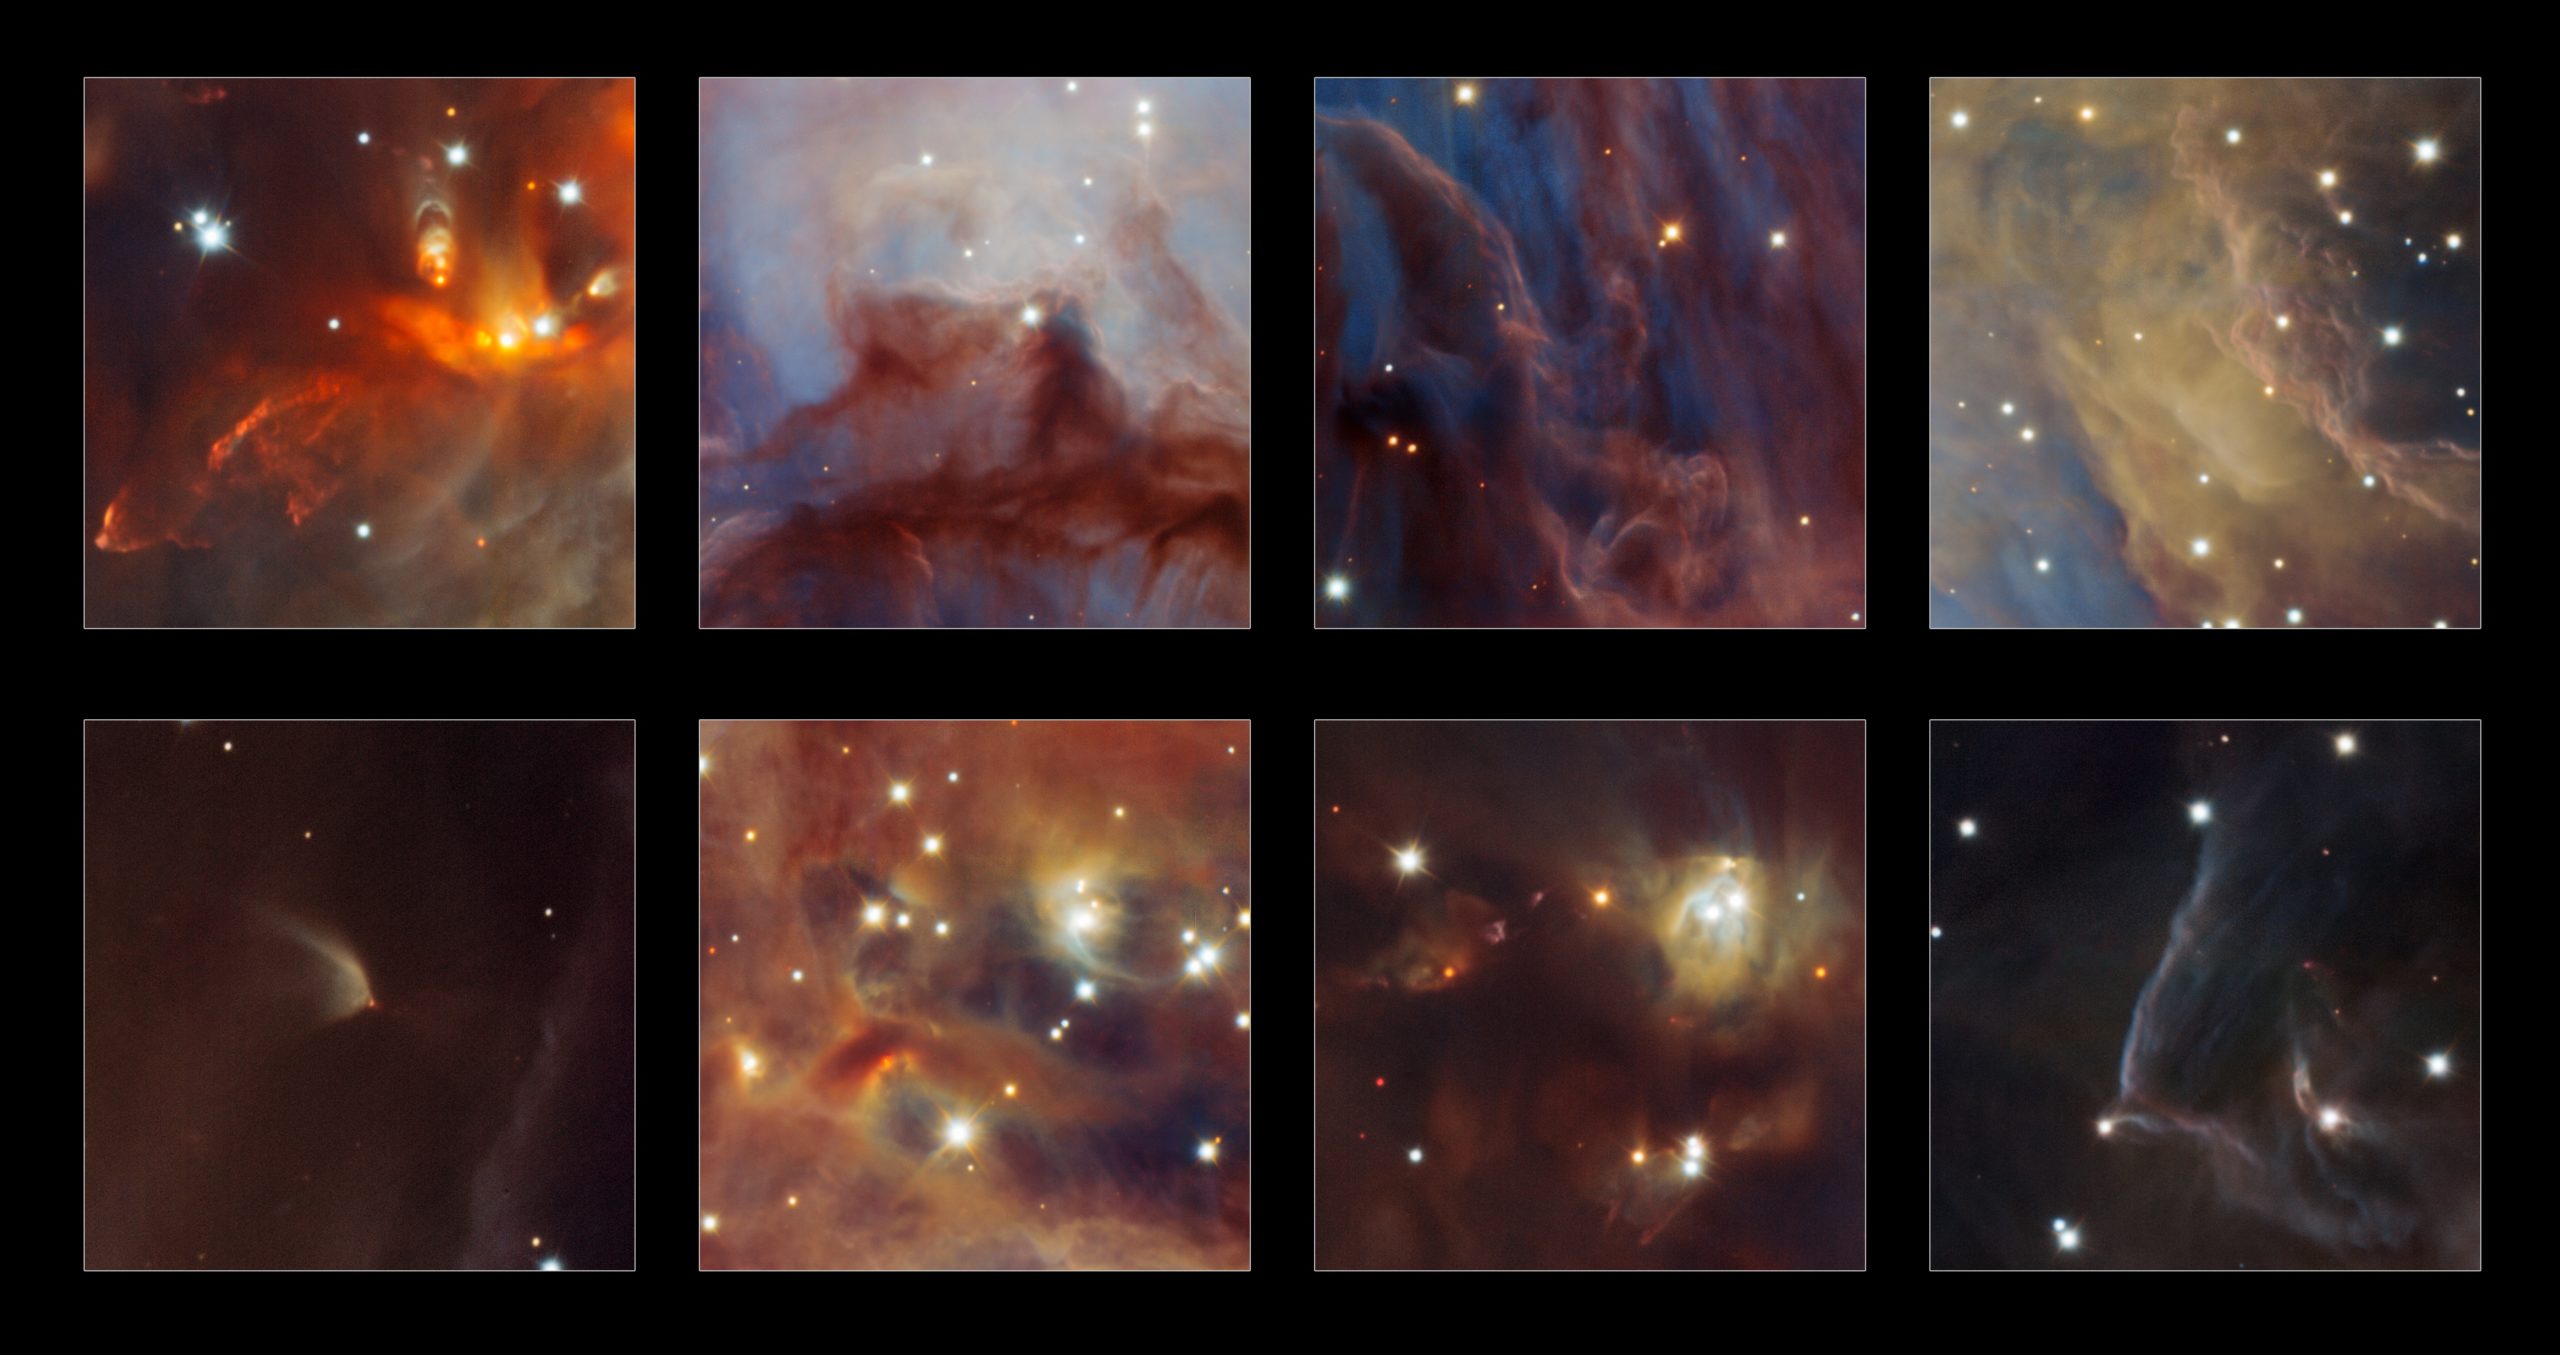 This Is The Deepest View Yet Into The Orion Nebula